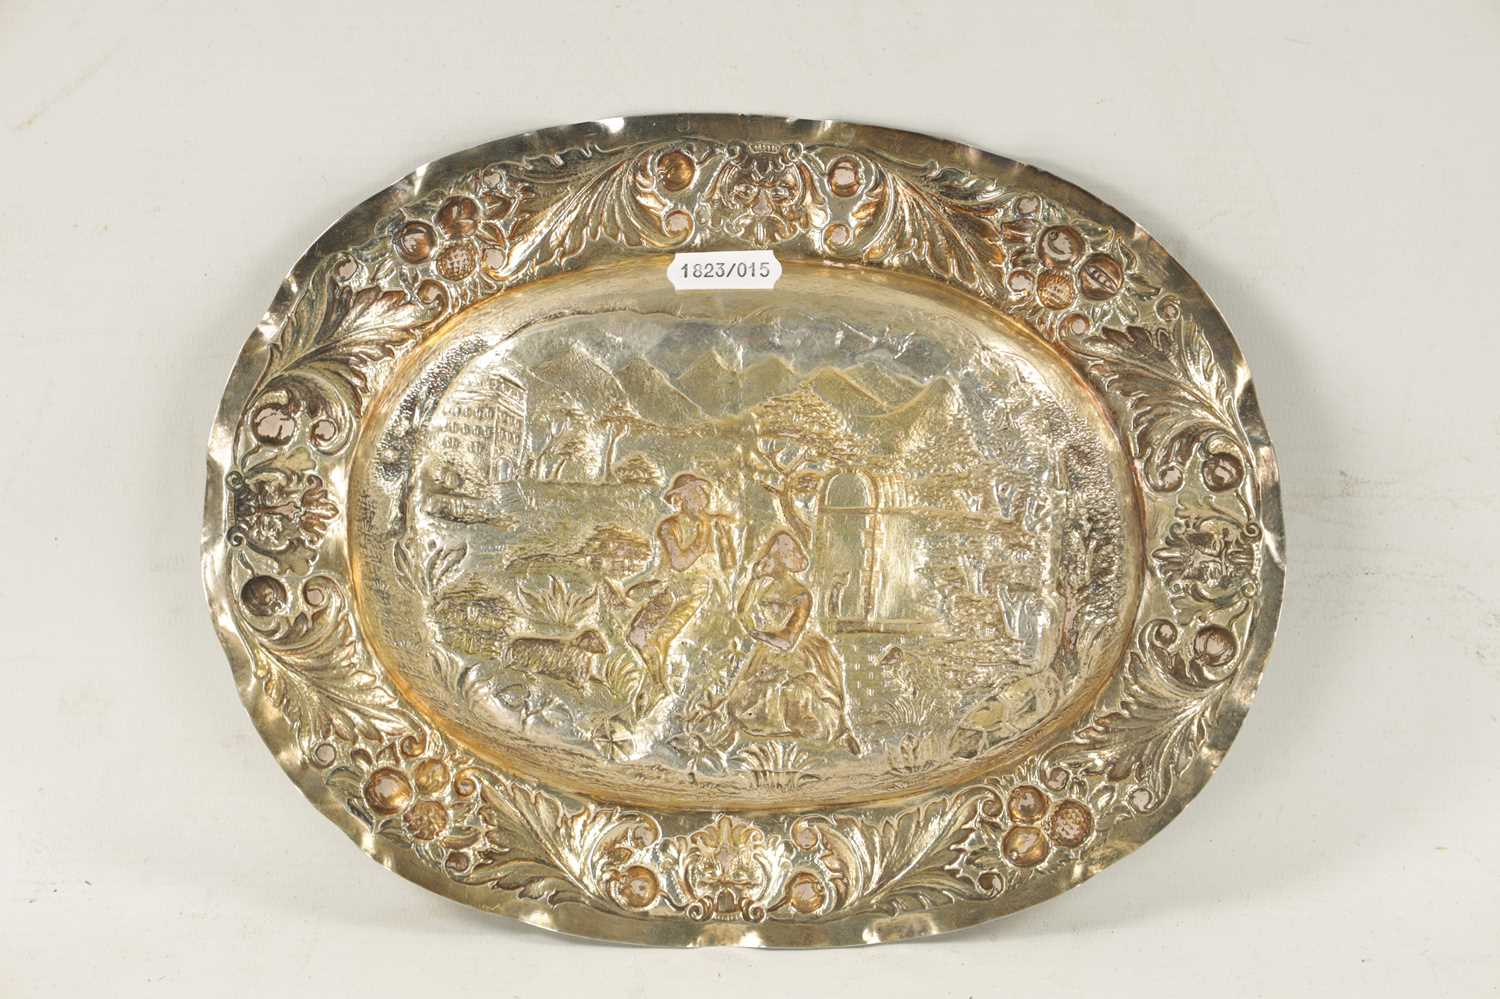 AN 18TH CENTURY GERMAN REPOUSSE SILVER AND SILVER GILT OVAL CHARGER - Image 6 of 10